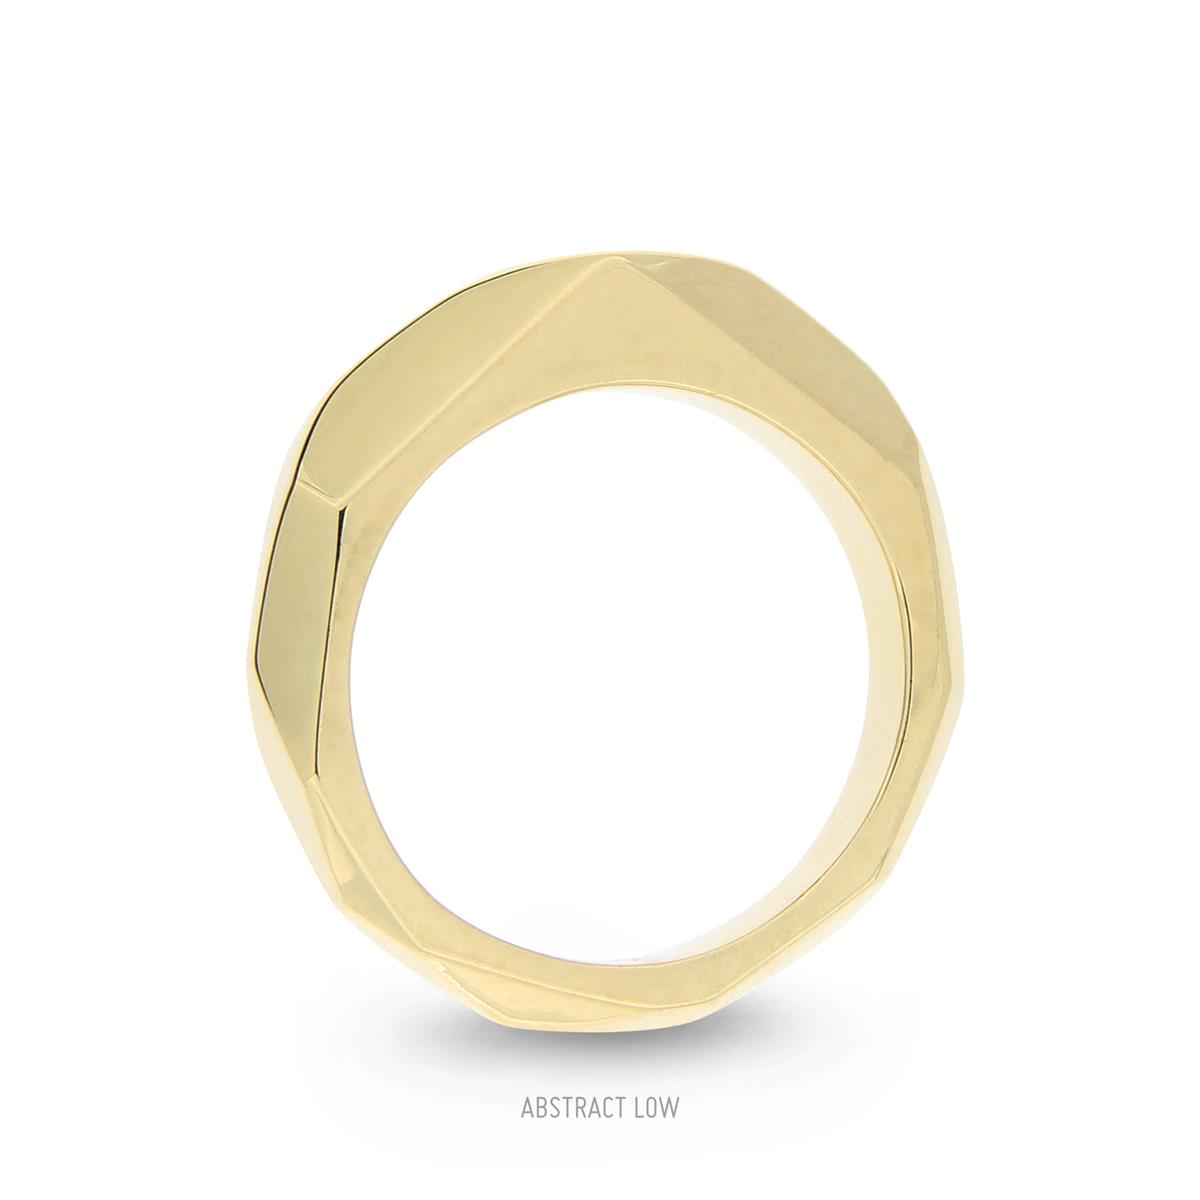 Katie g. Jewellery - Abstract Low - Champagnergold